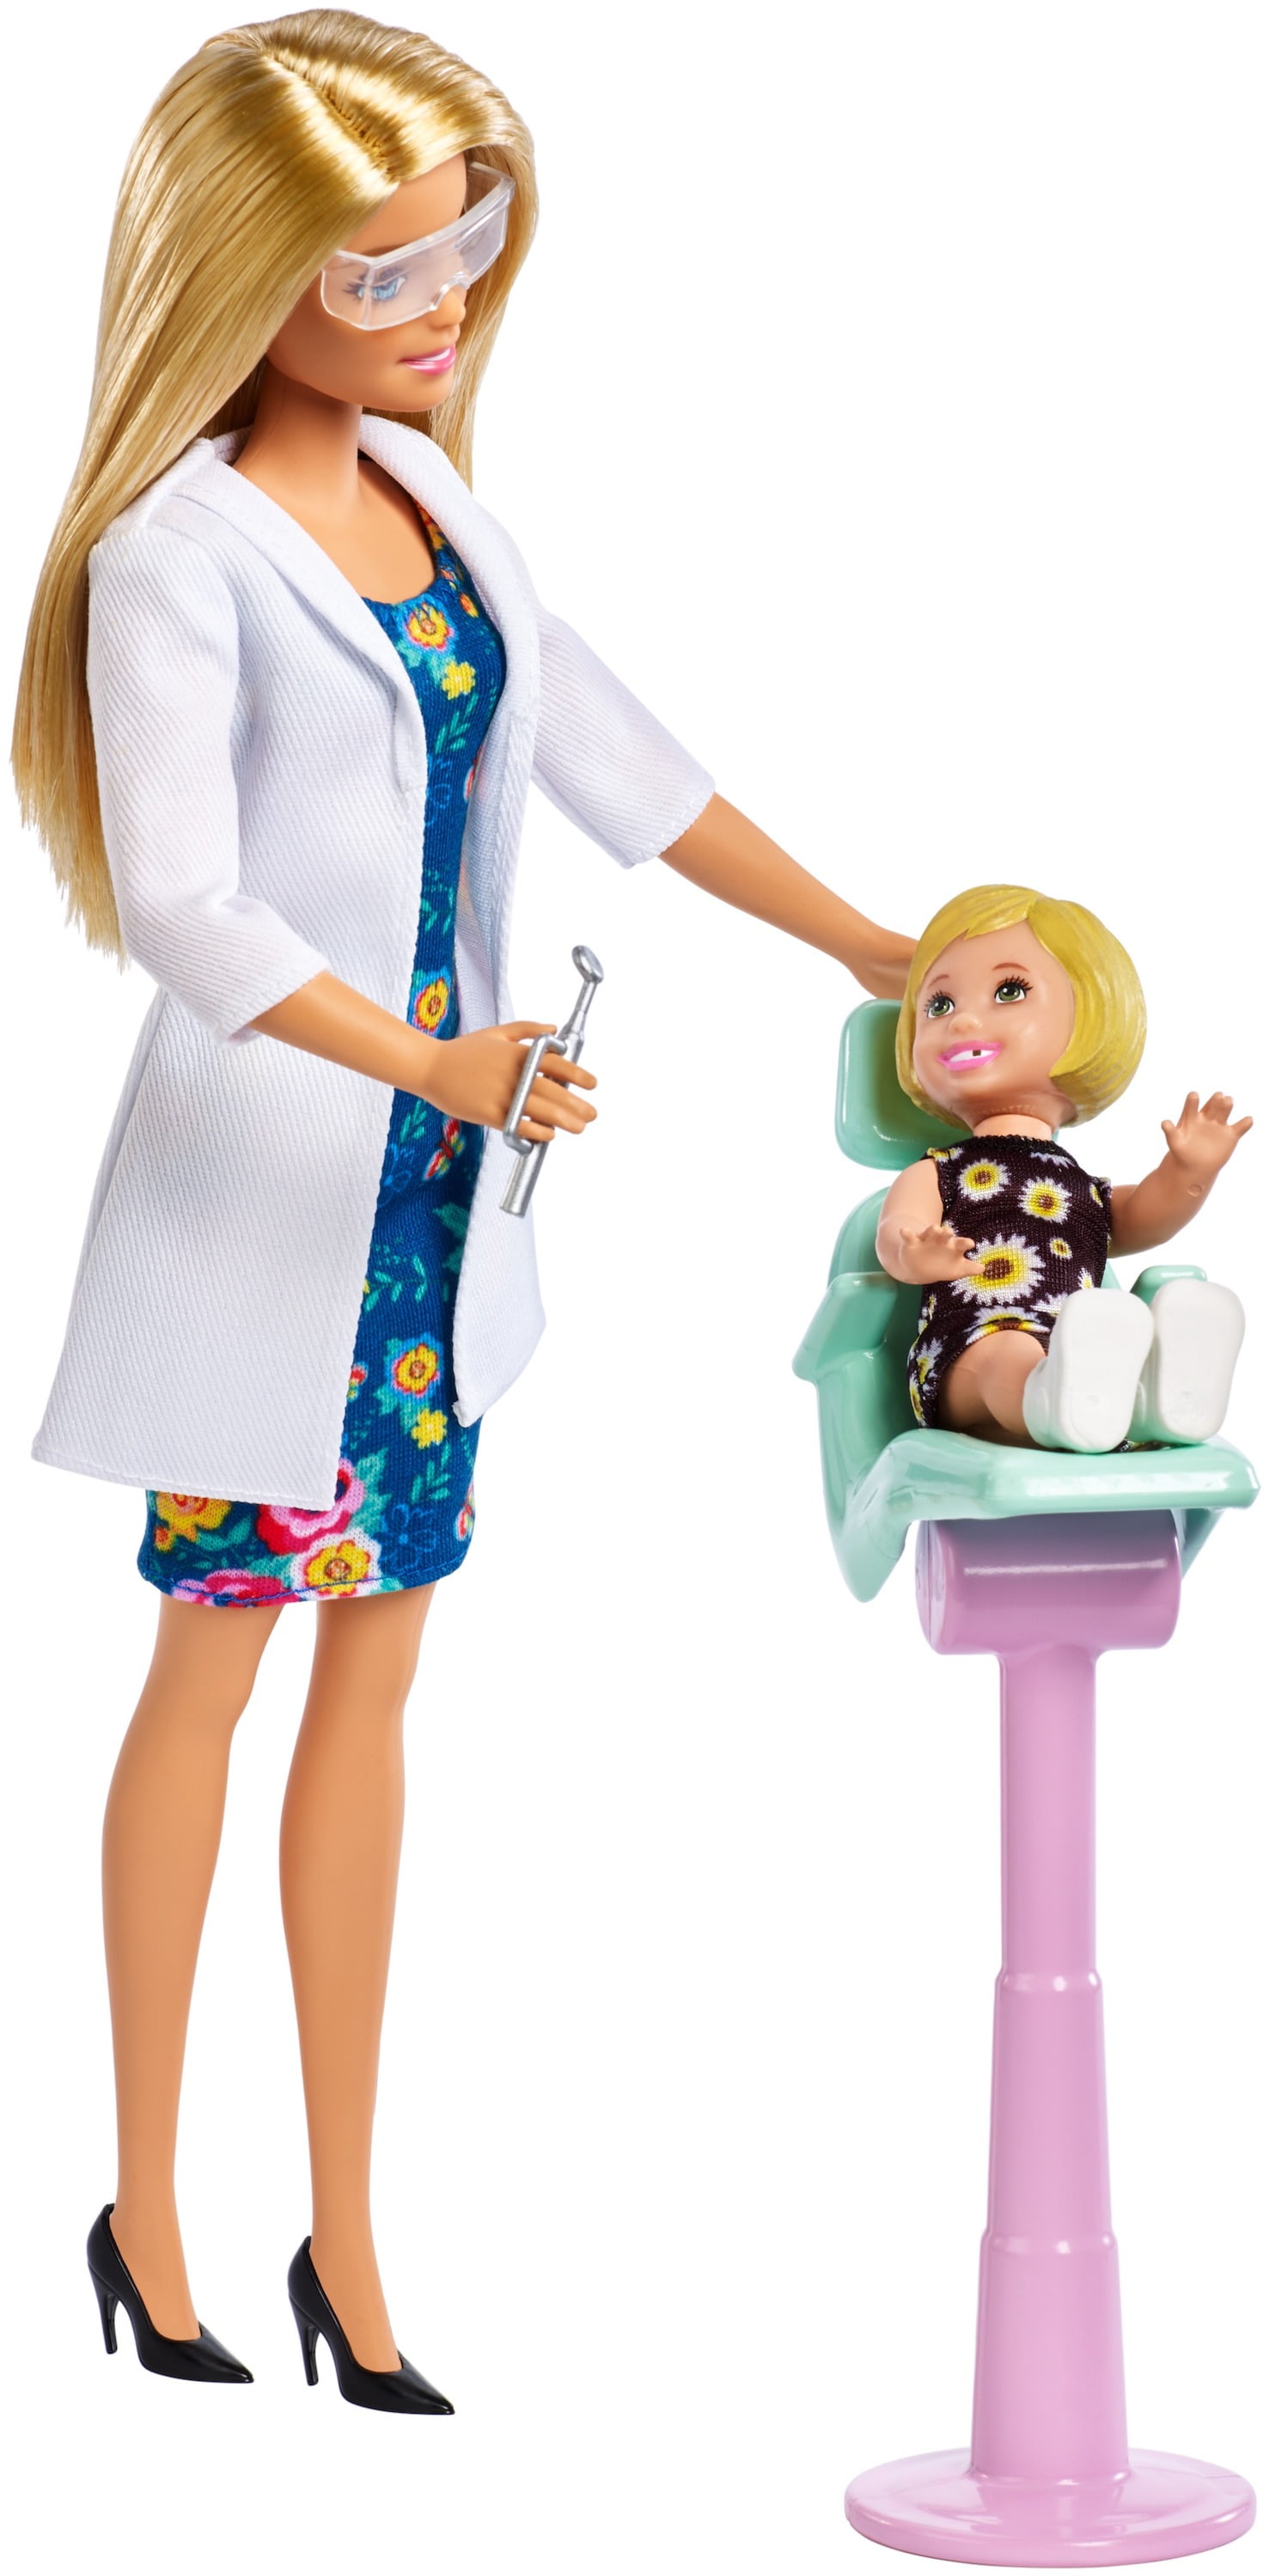 Barbie Dentist Career Doll Playset With Dentist Accessories Gift For Kids New* 